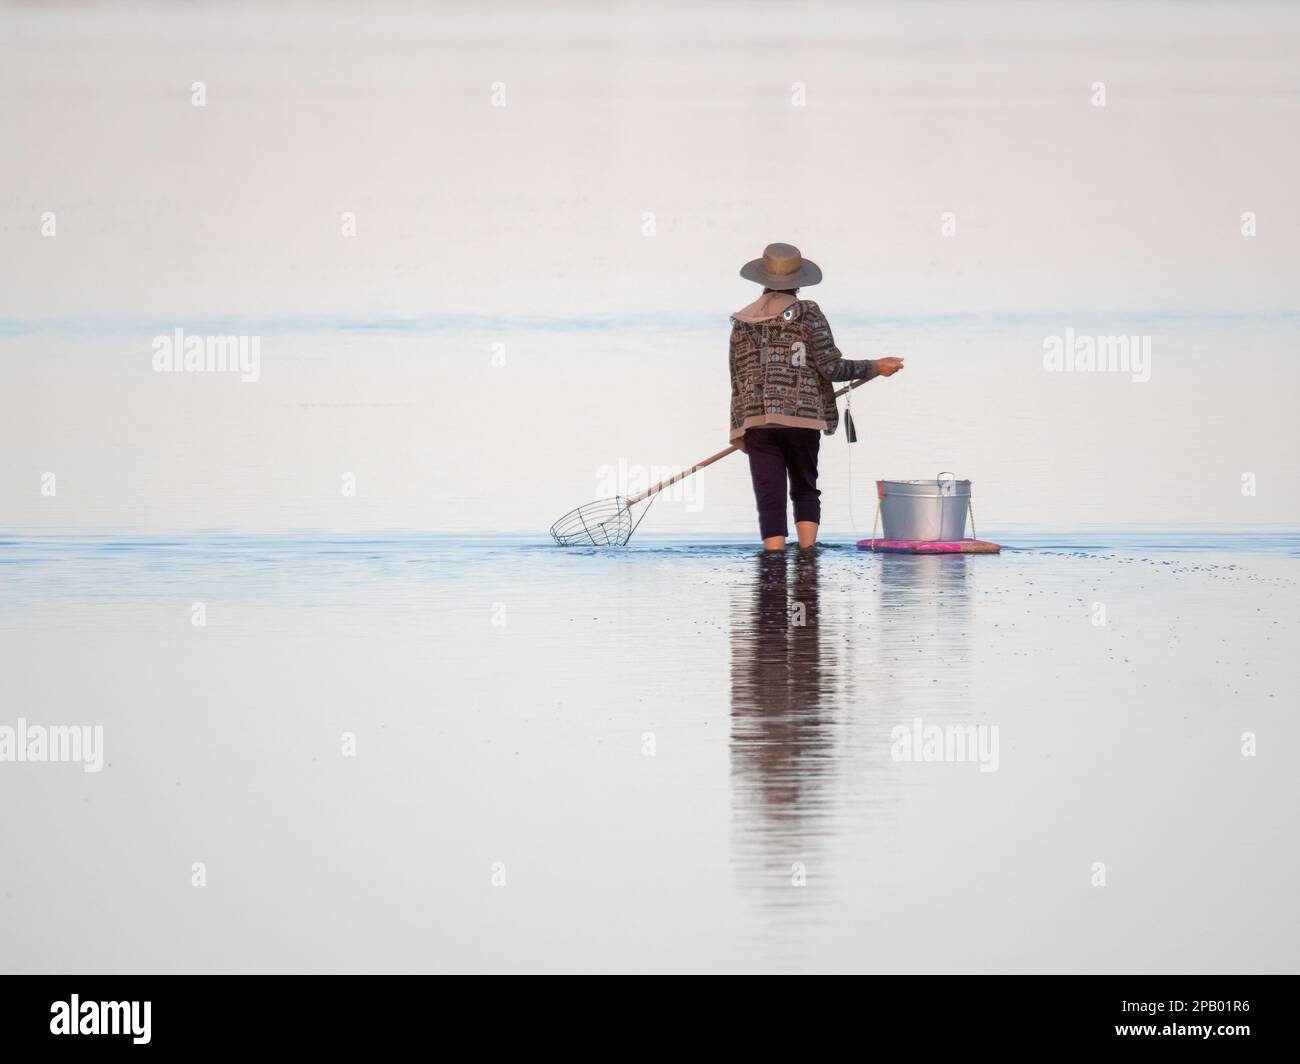 Unidentifiable person crab fishing with a scoop in the estuary, a popular recreational pastime, Mandurah, Western Australia Stock Photo